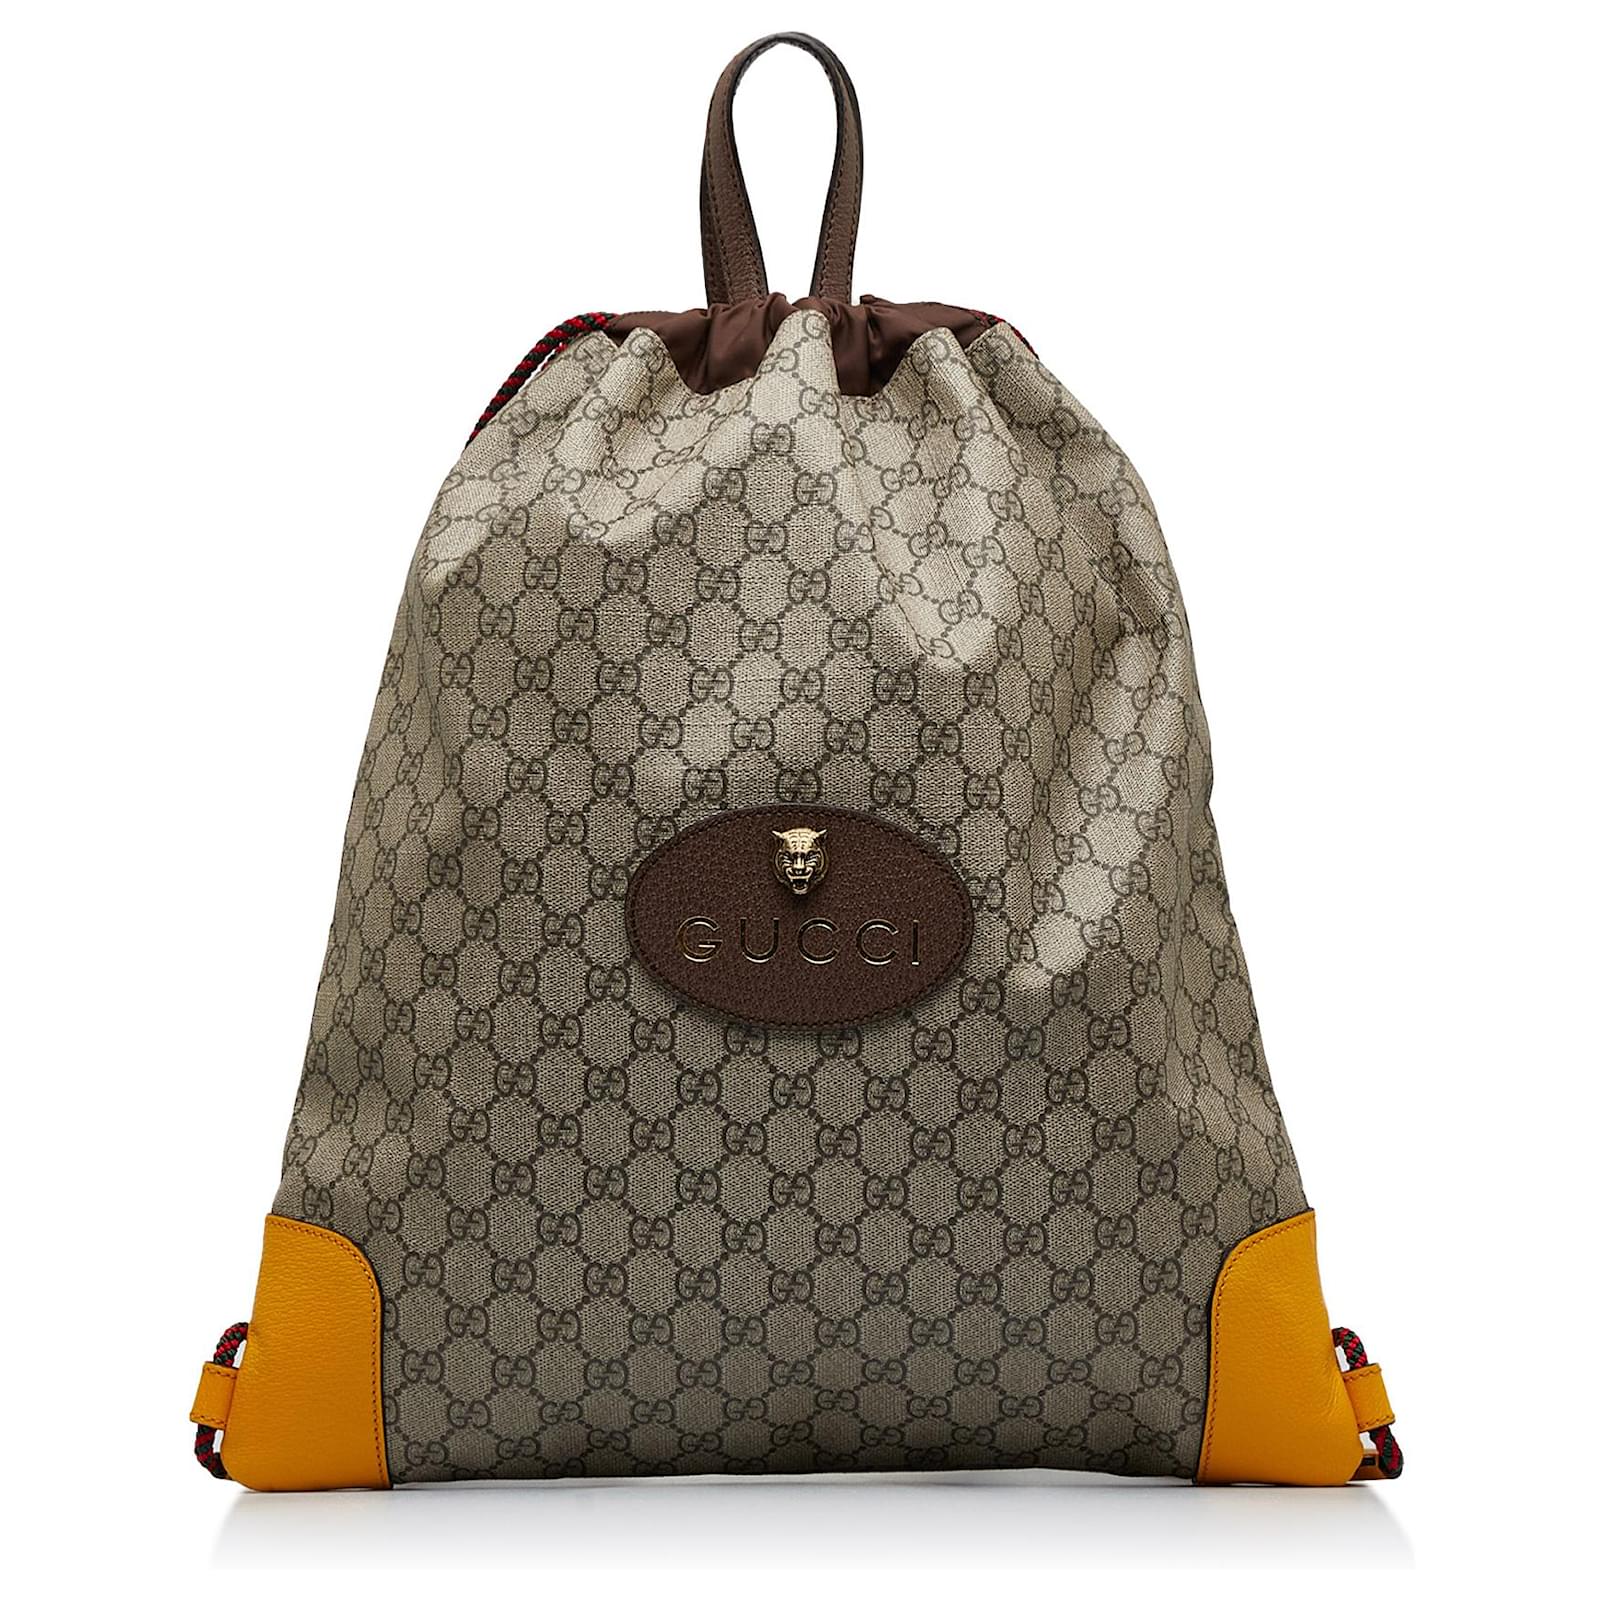 Gucci Beige GG Supreme Canvas and Leather Small Neo Vintage